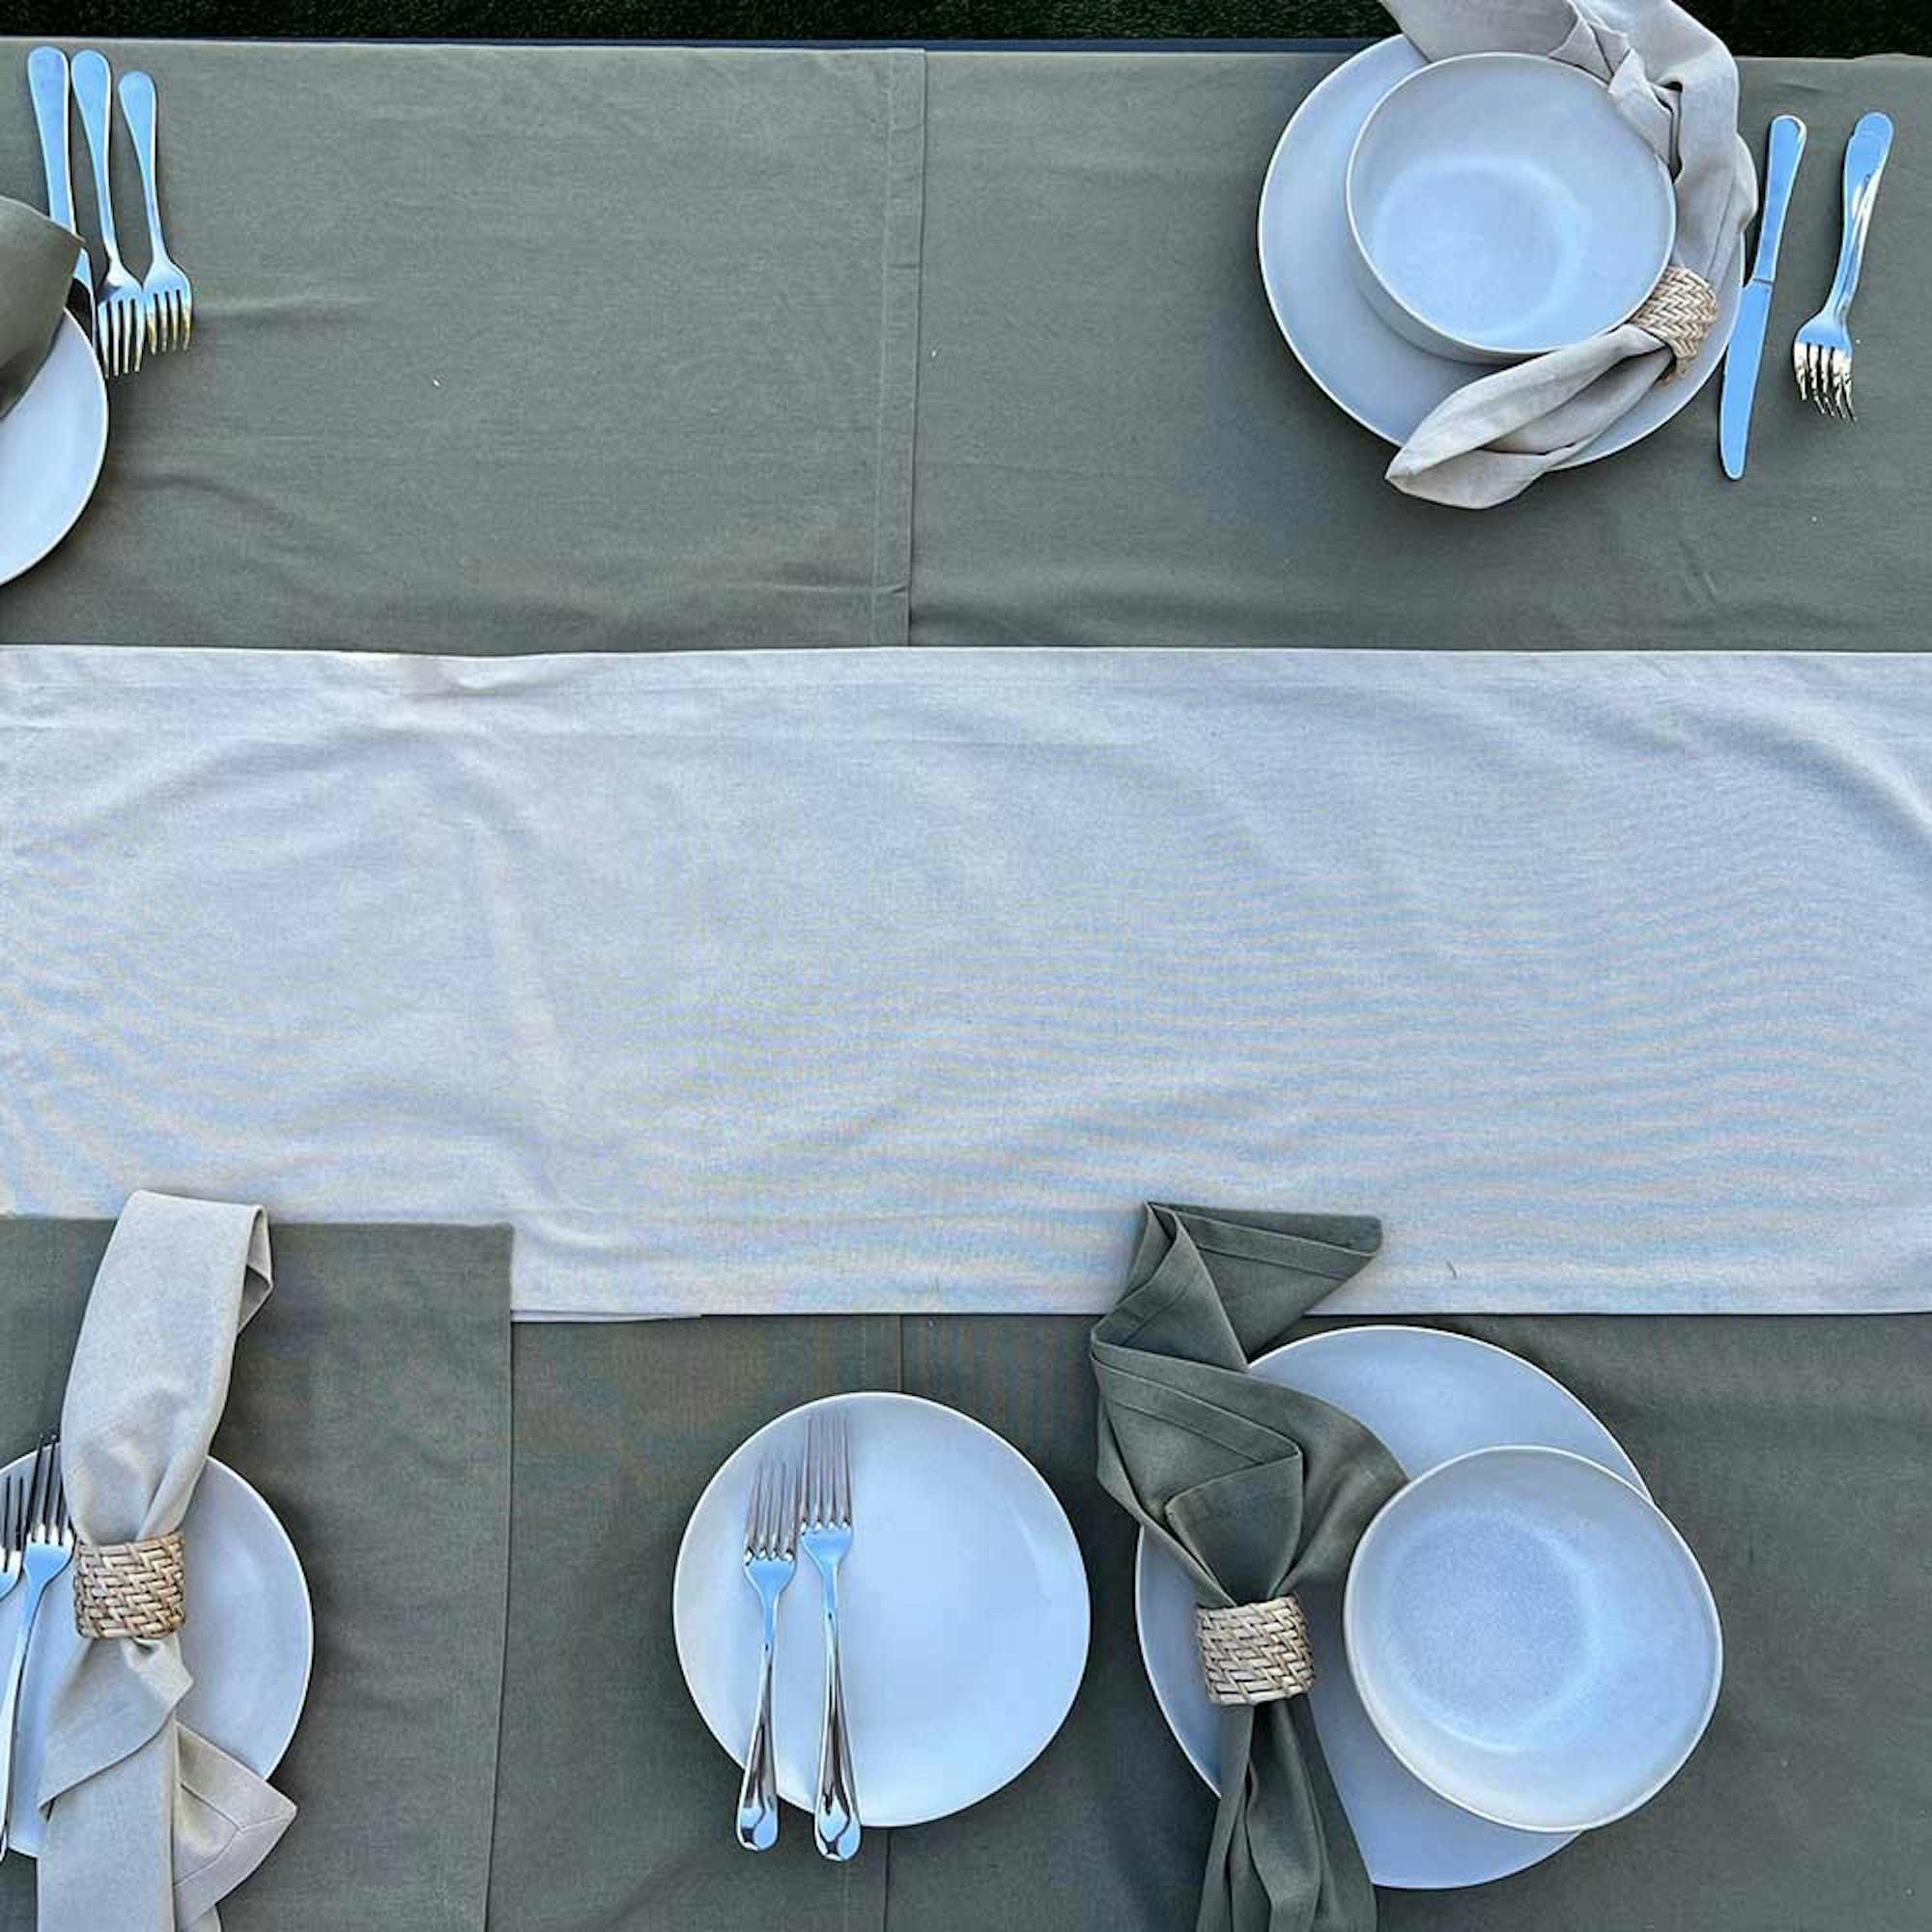 How to style a dining table for a dinner party. Step 5 place your napkins. Overhead of table linen, dinner set, and cutlery.